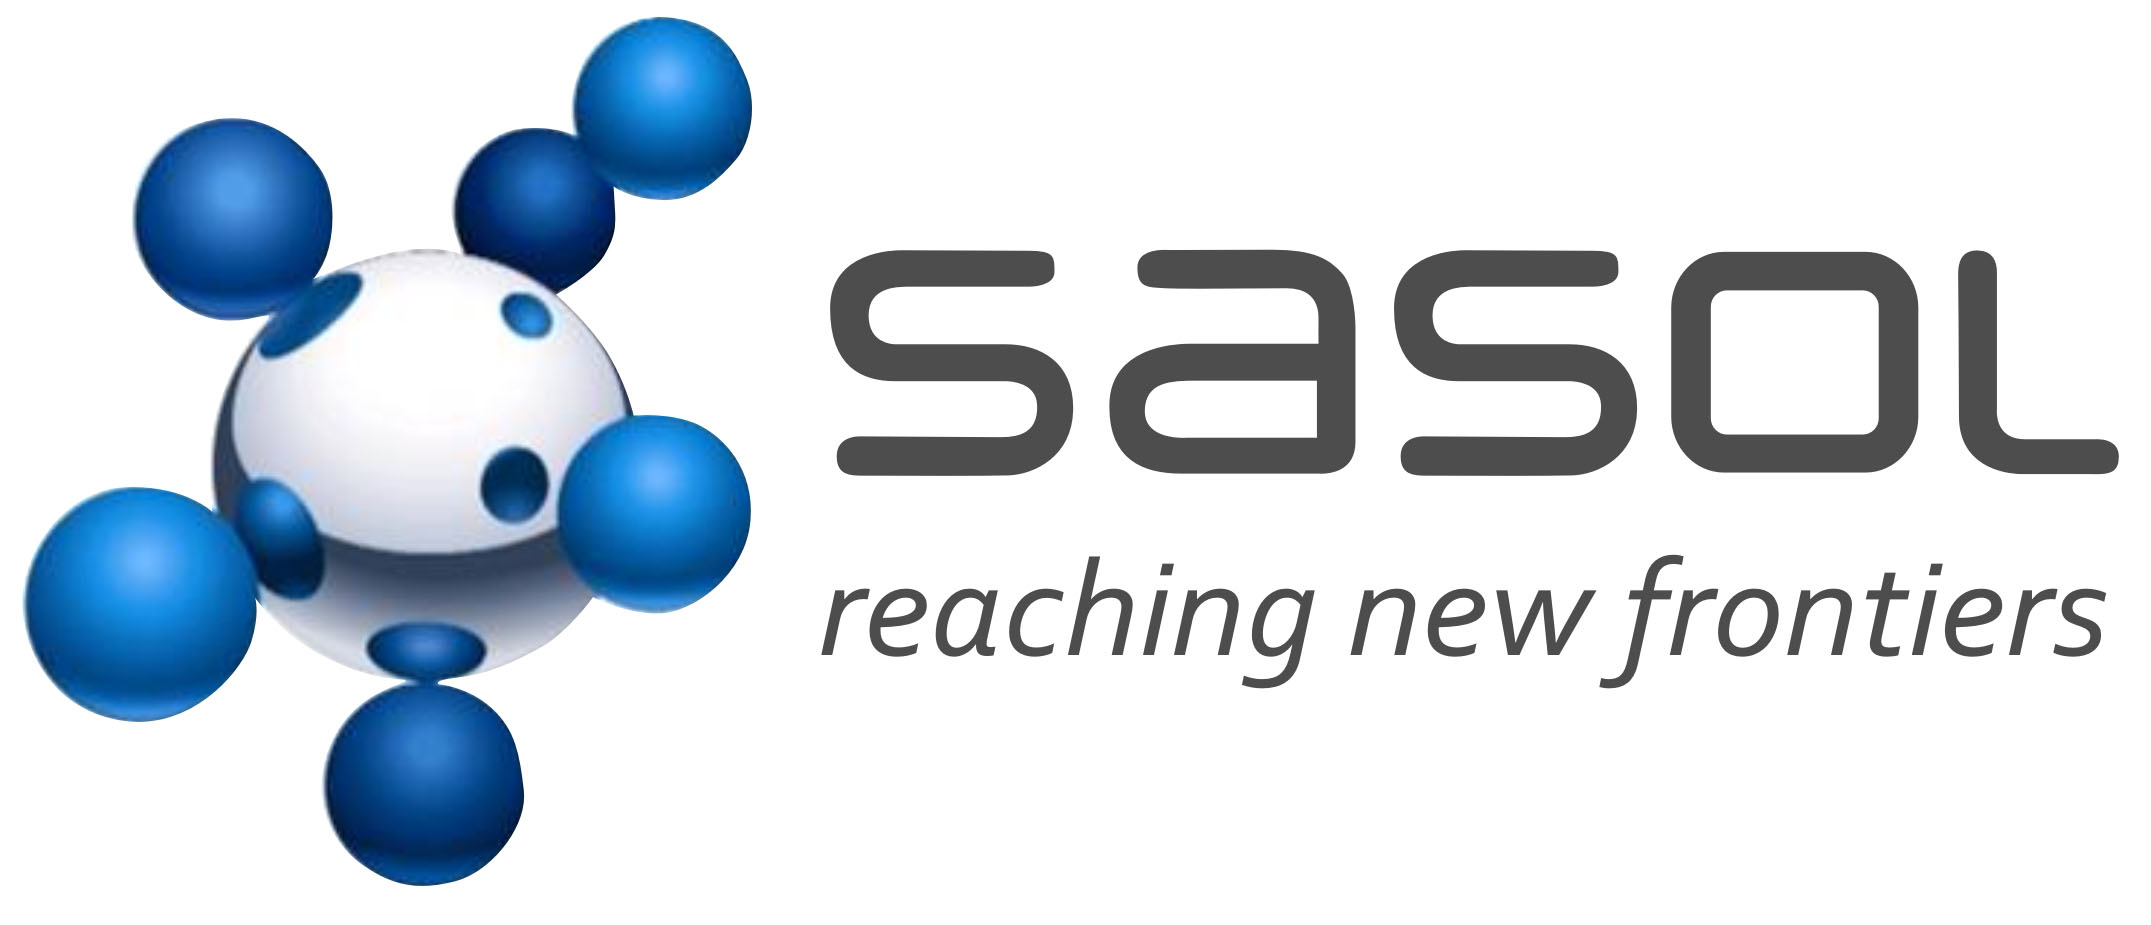 Regulating piped-gas: Sasol's pricing and the impact on large industrial users — CCRED - A leading university research group.